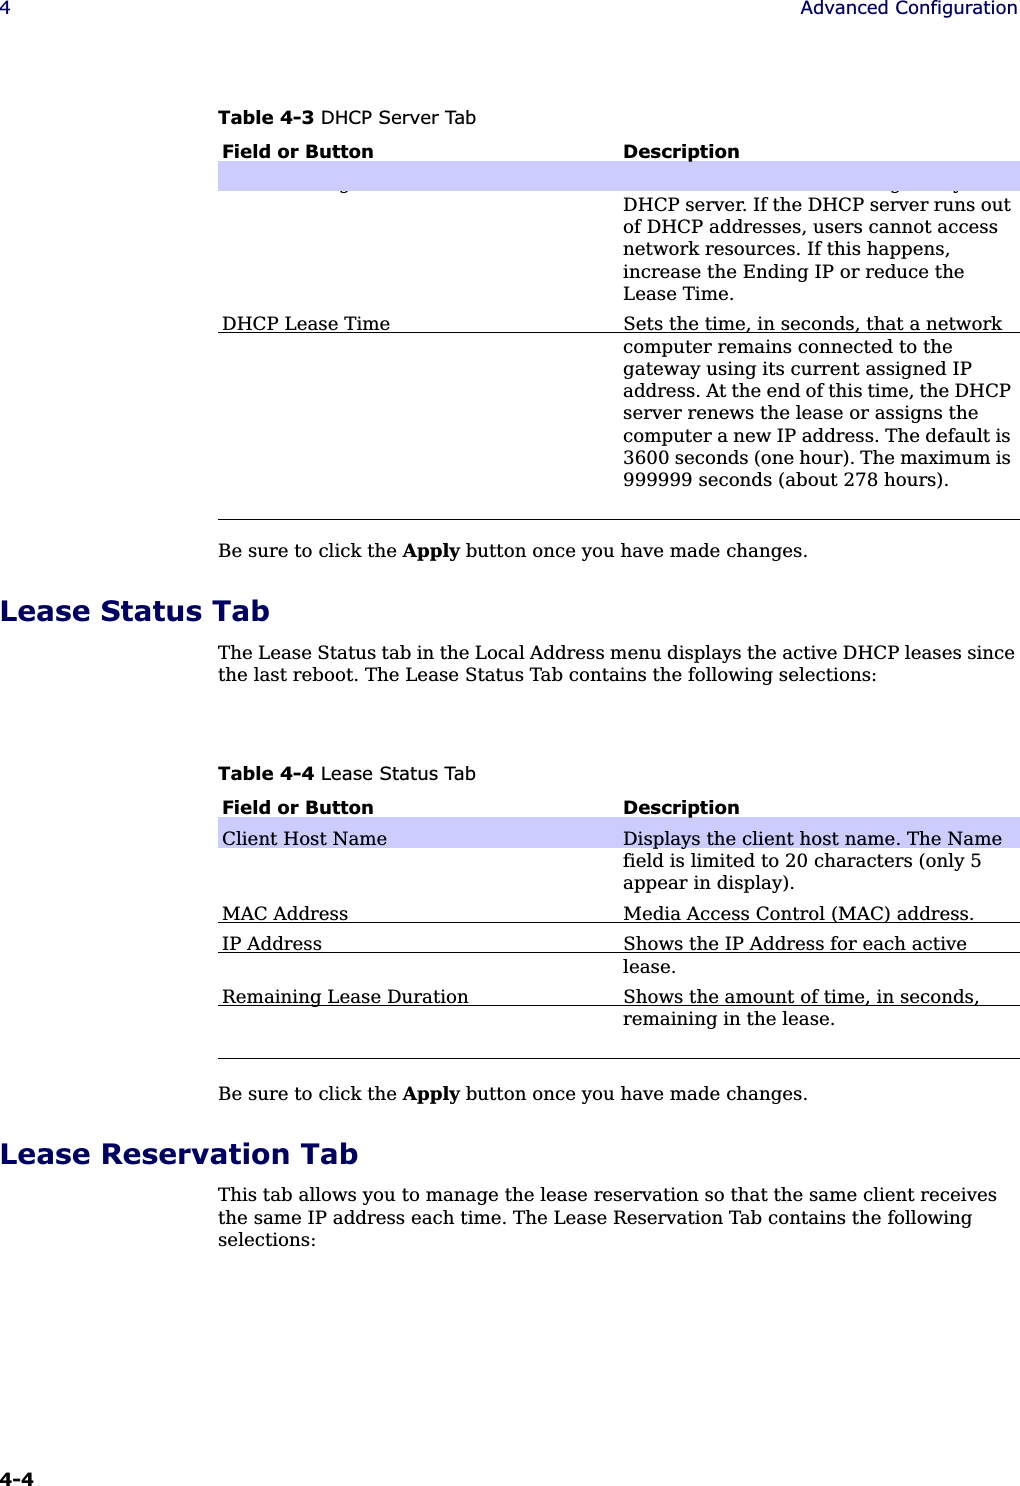 4-4 4Advanced ConfigurationBe sure to click the Apply button once you have made changes.Lease Status TabThe Lease Status tab in the Local Address menu displays the active DHCP leases since the last reboot. The Lease Status Tab contains the following selections:Be sure to click the Apply button once you have made changes.Lease Reservation TabThis tab allows you to manage the lease reservation so that the same client receives the same IP address each time. The Lease Reservation Tab contains the following selections:DHCP Ending IP Address Sets the final IP address assigned by the DHCP server. If the DHCP server runs out of DHCP addresses, users cannot access network resources. If this happens, increase the Ending IP or reduce the Lease Time.DHCP Lease Time Sets the time, in seconds, that a network computer remains connected to the gateway using its current assigned IP address. At the end of this time, the DHCP server renews the lease or assigns the computer a new IP address. The default is 3600 seconds (one hour). The maximum is 999999 seconds (about 278 hours).Table 4-3 DHCP Server TabField or Button DescriptionTable 4-4 Lease Status TabField or Button DescriptionClient Host Name Displays the client host name. The Name field is limited to 20 characters (only 5 appear in display).MAC Address Media Access Control (MAC) address. IP Address Shows the IP Address for each active lease.Remaining Lease Duration Shows the amount of time, in seconds, remaining in the lease.